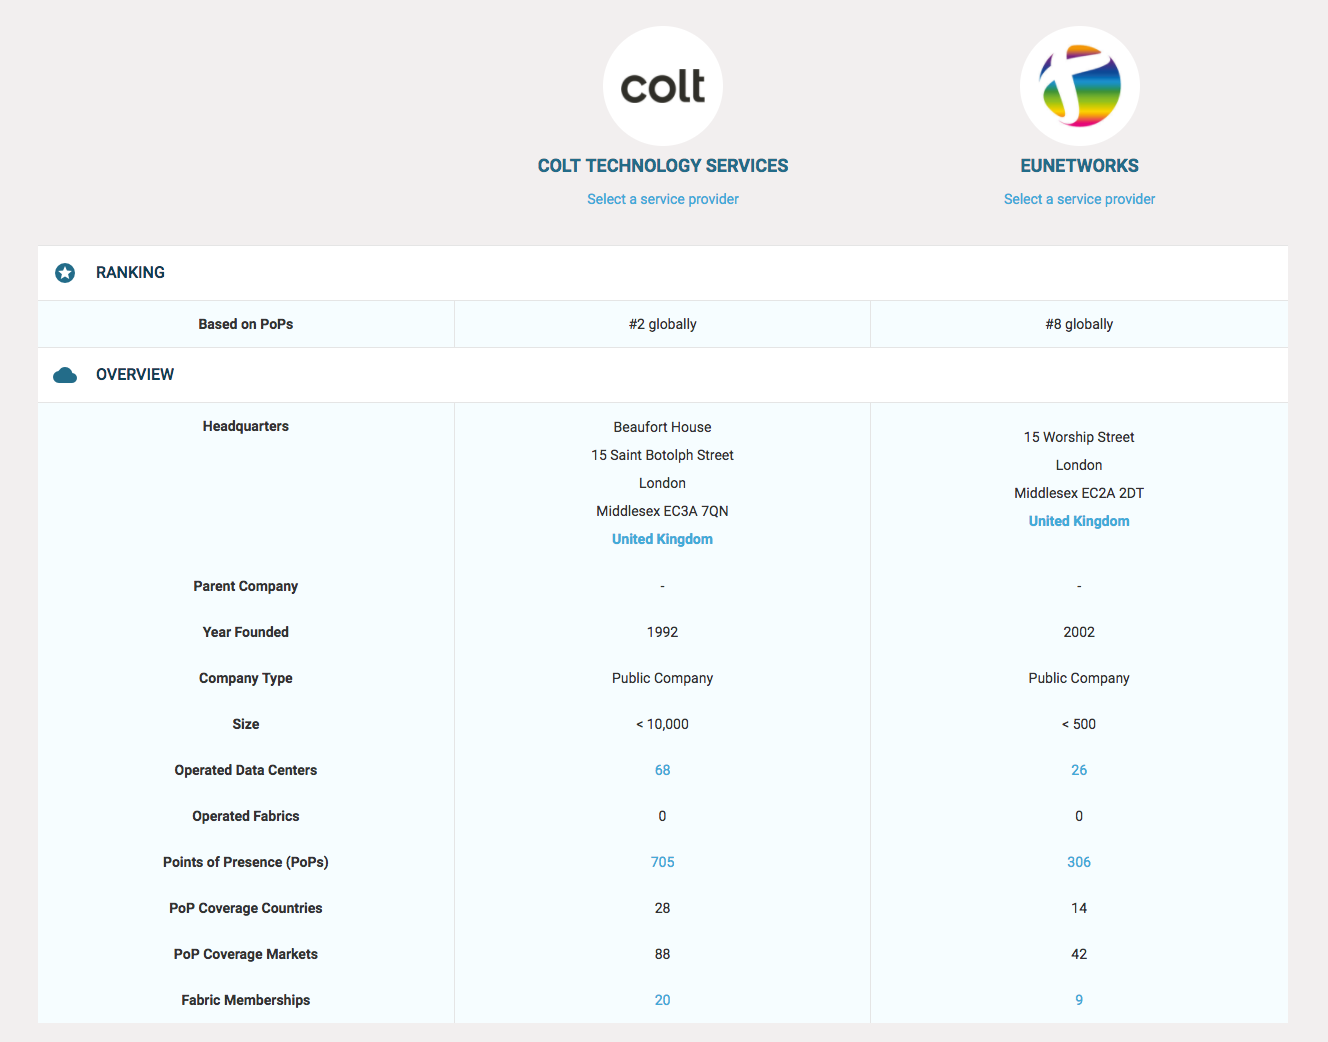 Colt and euNetworks